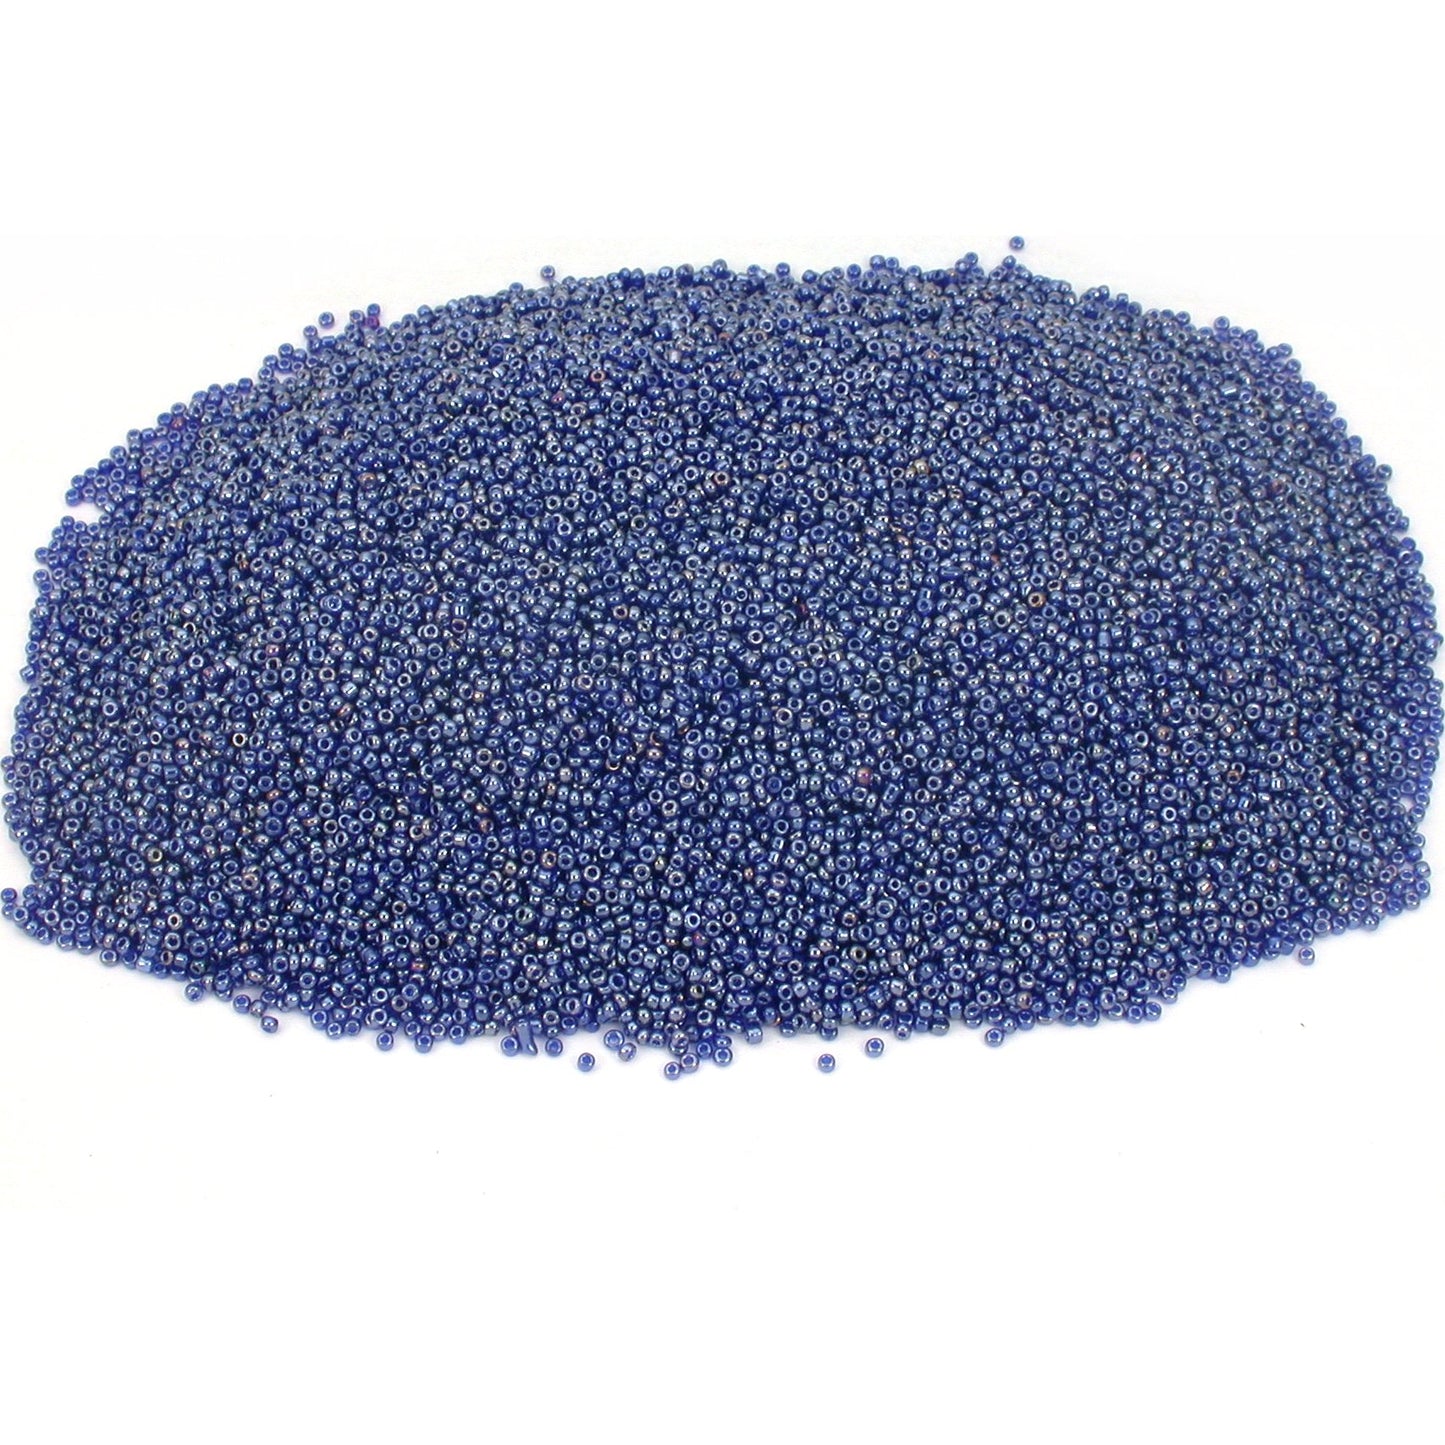 Seed Glass Beads Blue 2mm 500 Grams Approx.